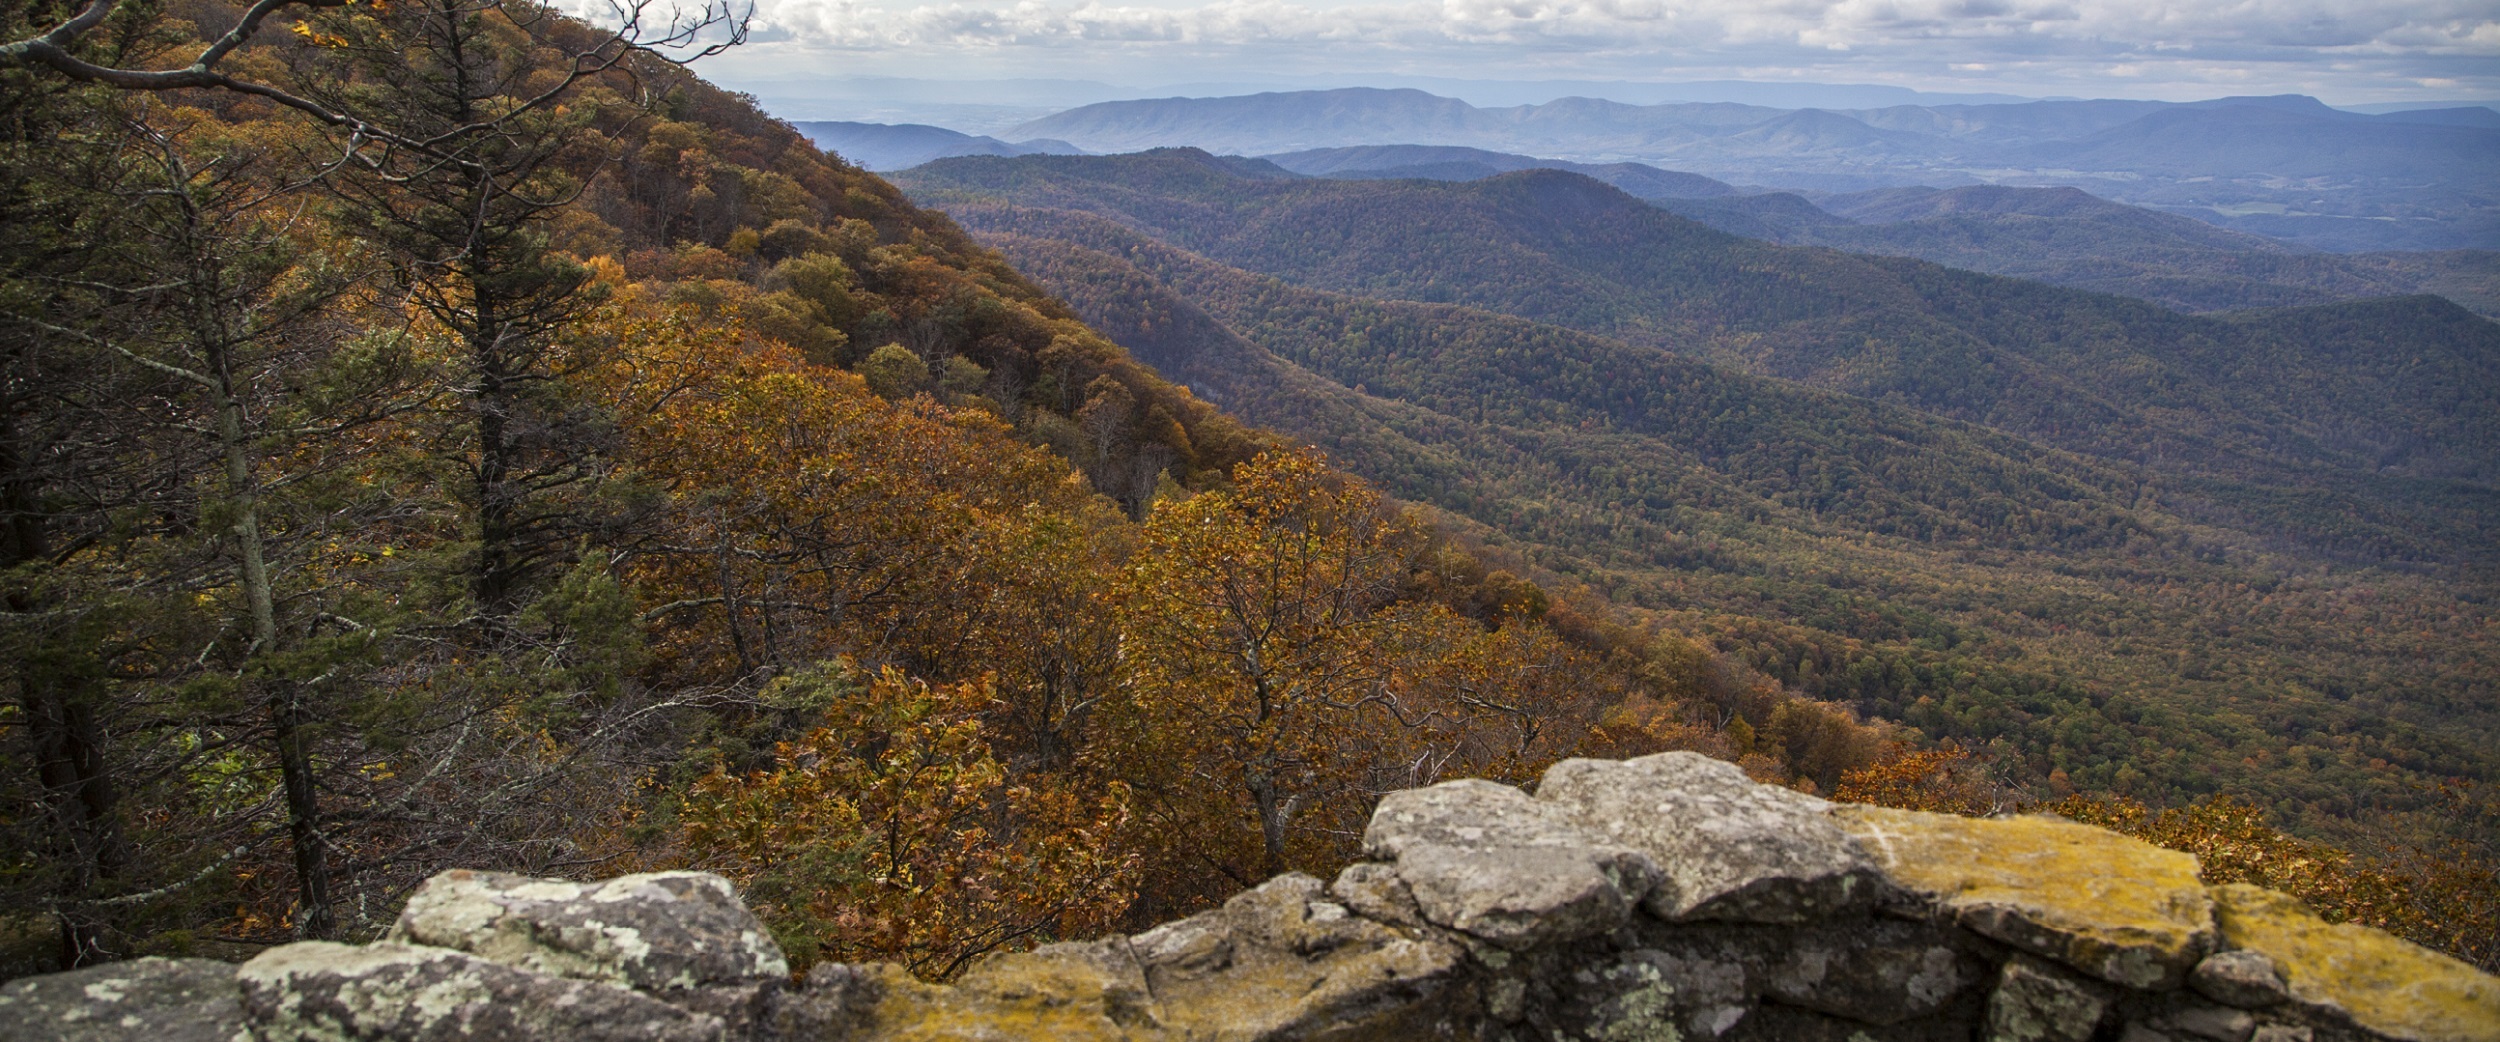 Fall Getaways in the Shenandoah Valley